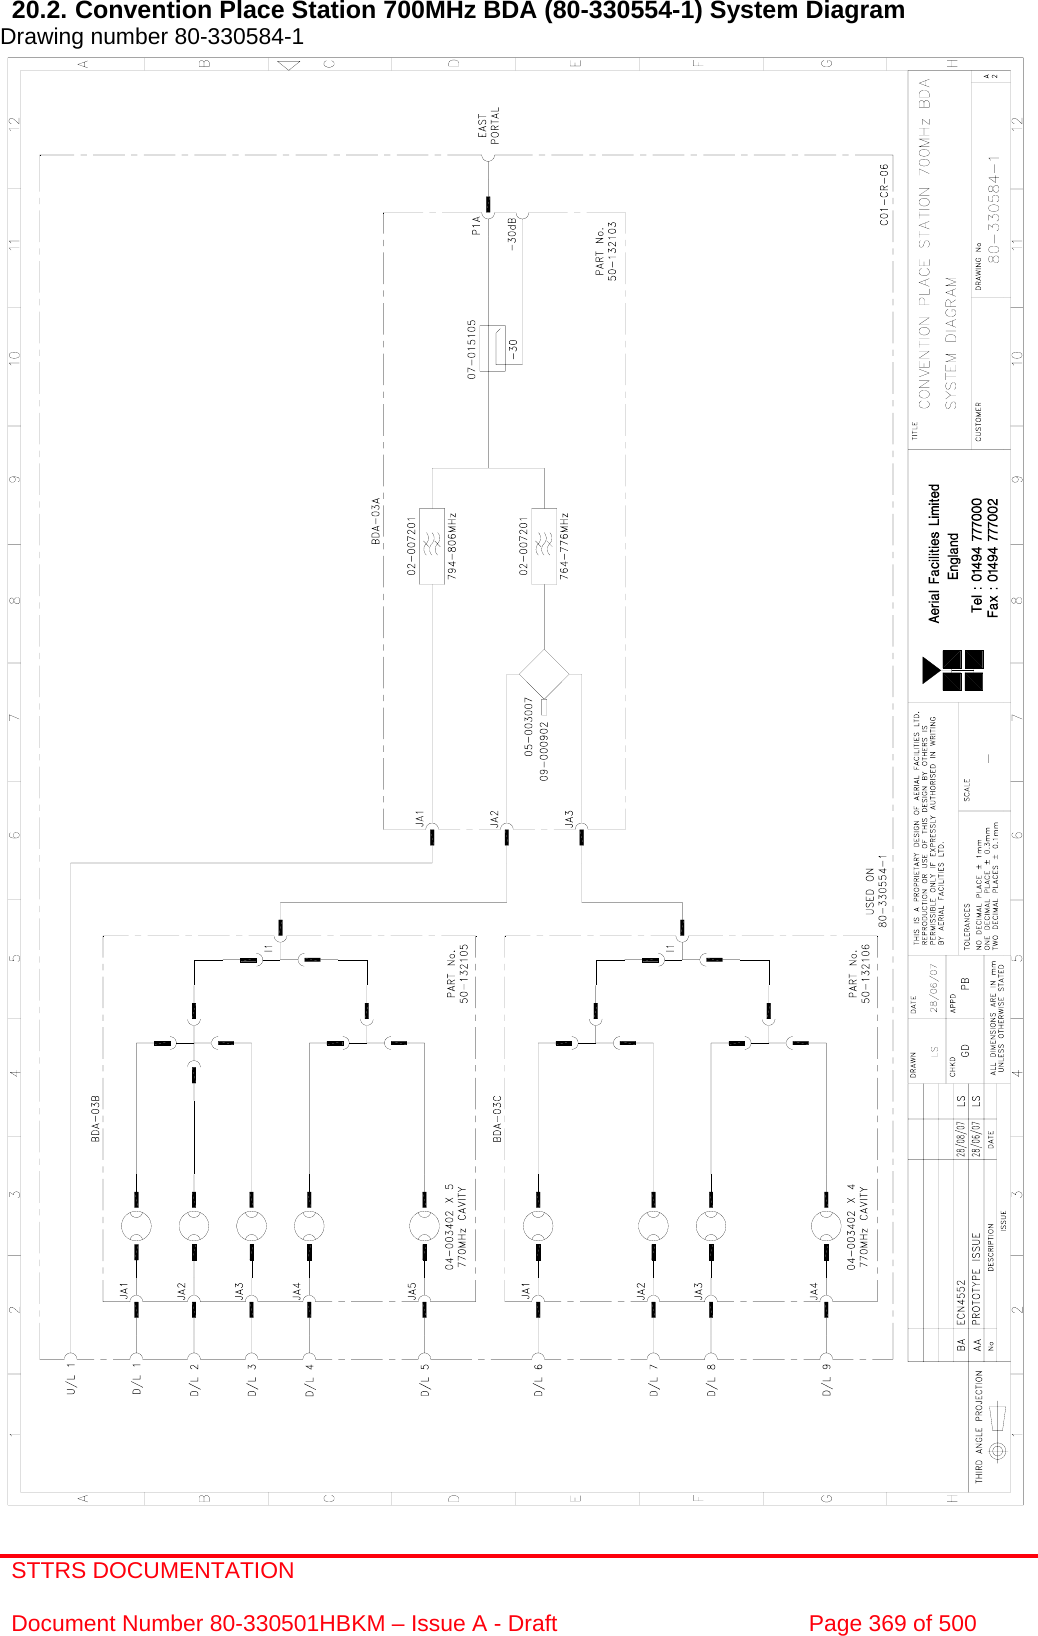 STTRS DOCUMENTATION  Document Number 80-330501HBKM – Issue A - Draft  Page 369 of 500   20.2. Convention Place Station 700MHz BDA (80-330554-1) System Diagram Drawing number 80-330584-1                                                       